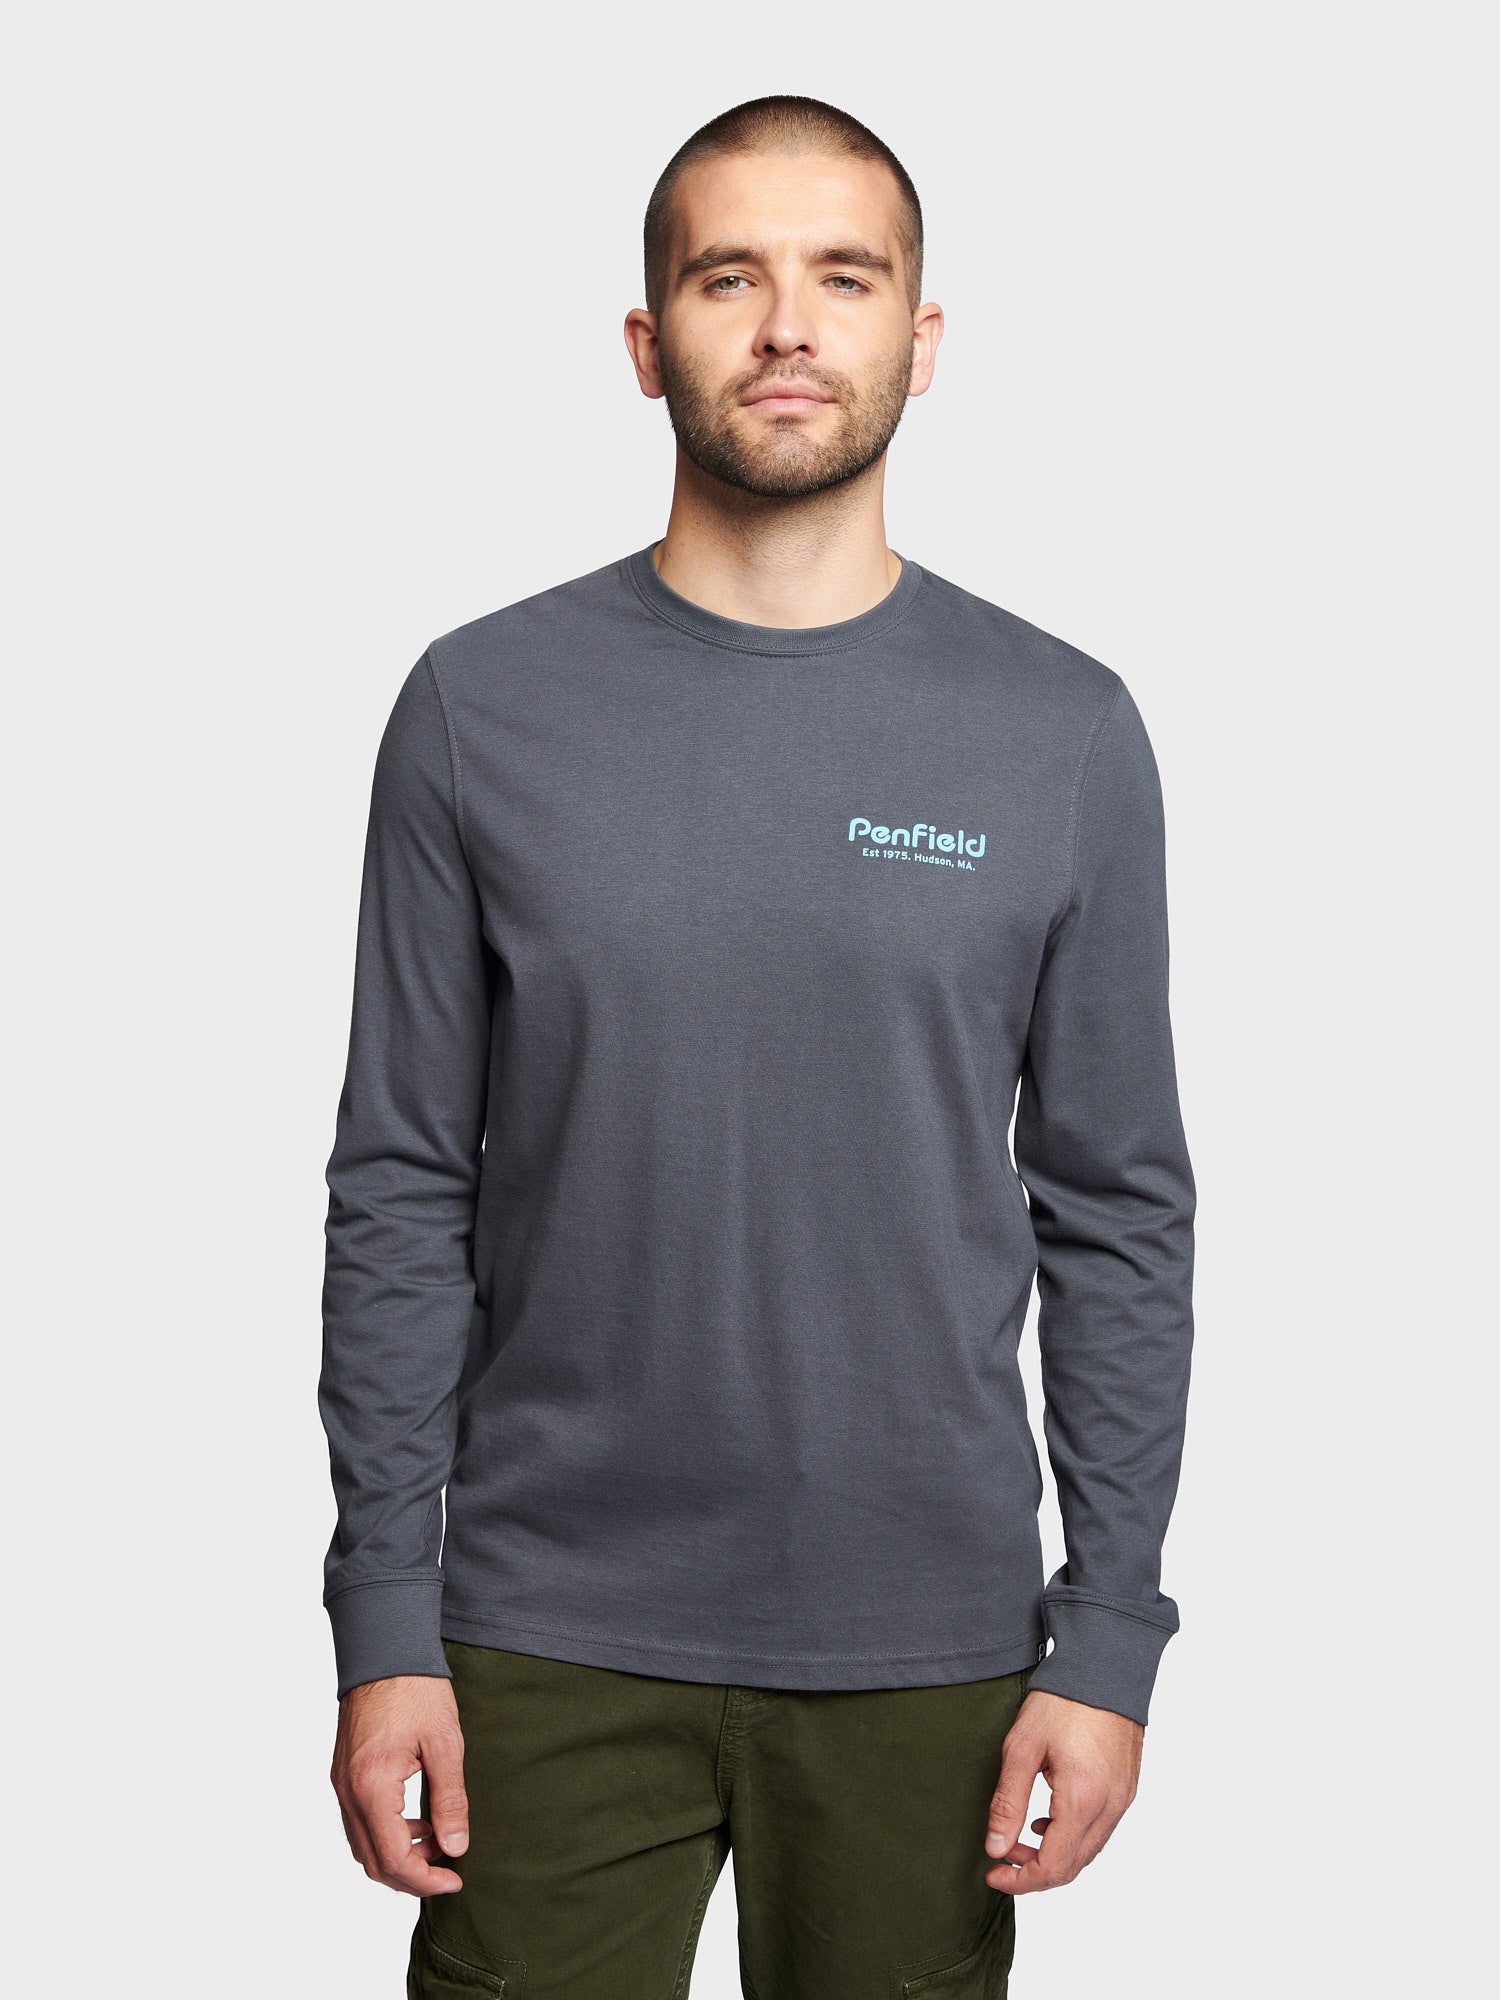 Sketch Mountain Back Graphic Long Sleeve T-Shirt in Ebony